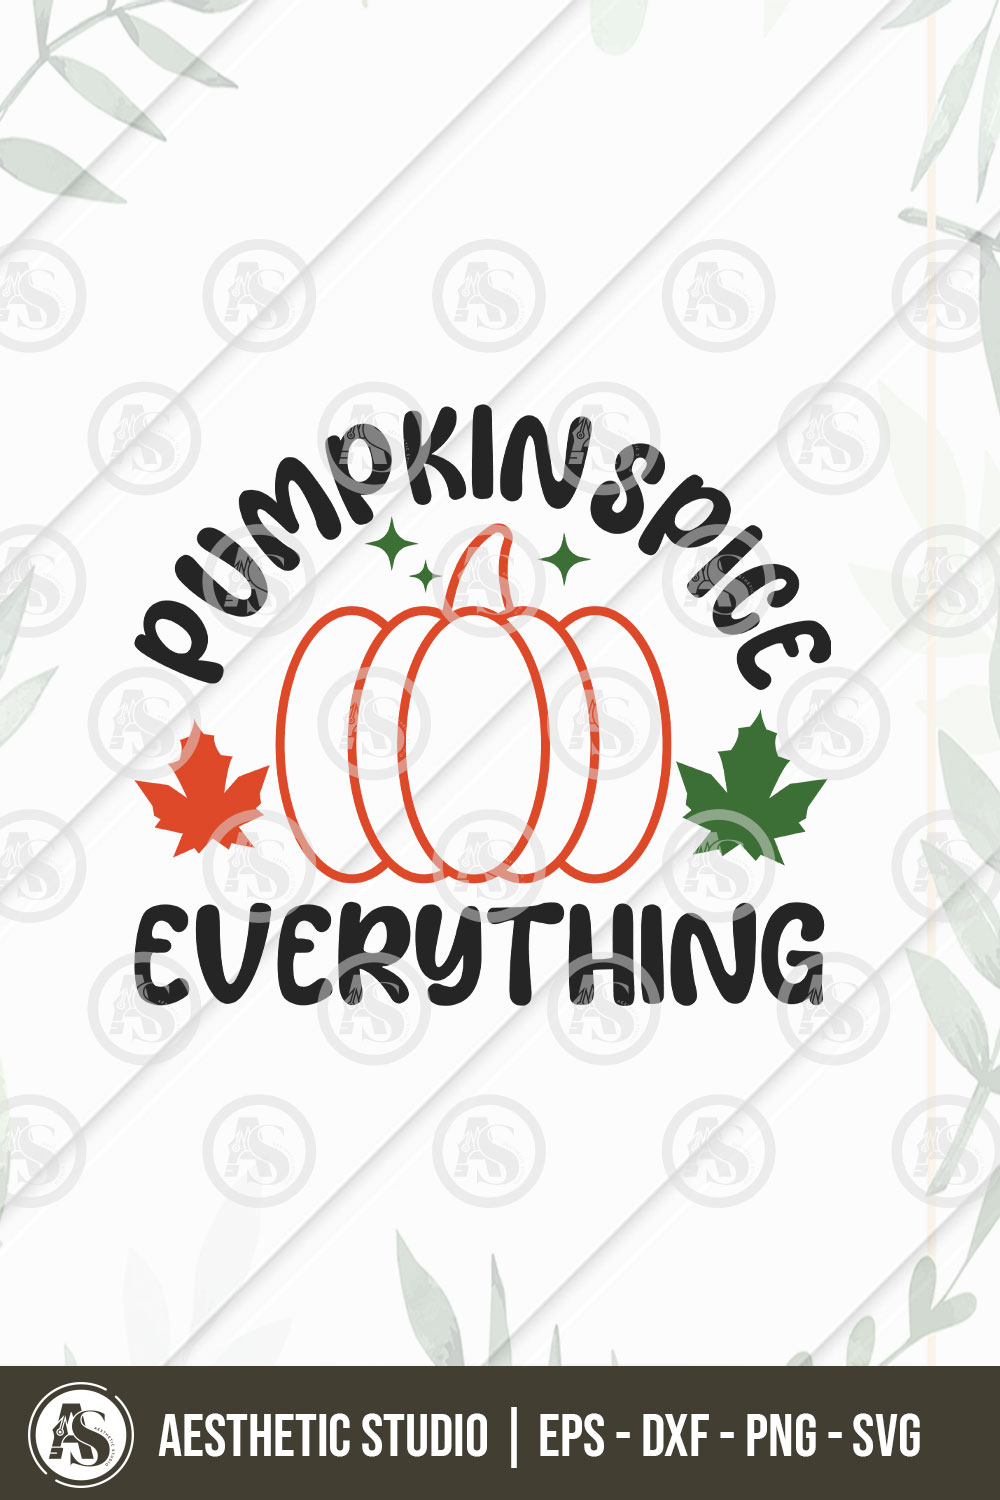 Pumpkin Spice Everything Svg, Fall Svg, Autumn Svg, Thanksgiving Svg, Grateful svg, Thanksgiving Quote, Cut Files for Cricut, Thankful Svg, Pumpkin svg, Turkey svg, Gobble Svg, Pumpkin Spice, Fall Leaves Svg, Fall Vibes Svg, Everything Svg, Thanksgiving Shirt, Thanksgiving png, Thanksgiving eps, Thanksgiving day, gift for Thanksgiving, holidays, celebrate, Cut Files pinterest preview image.